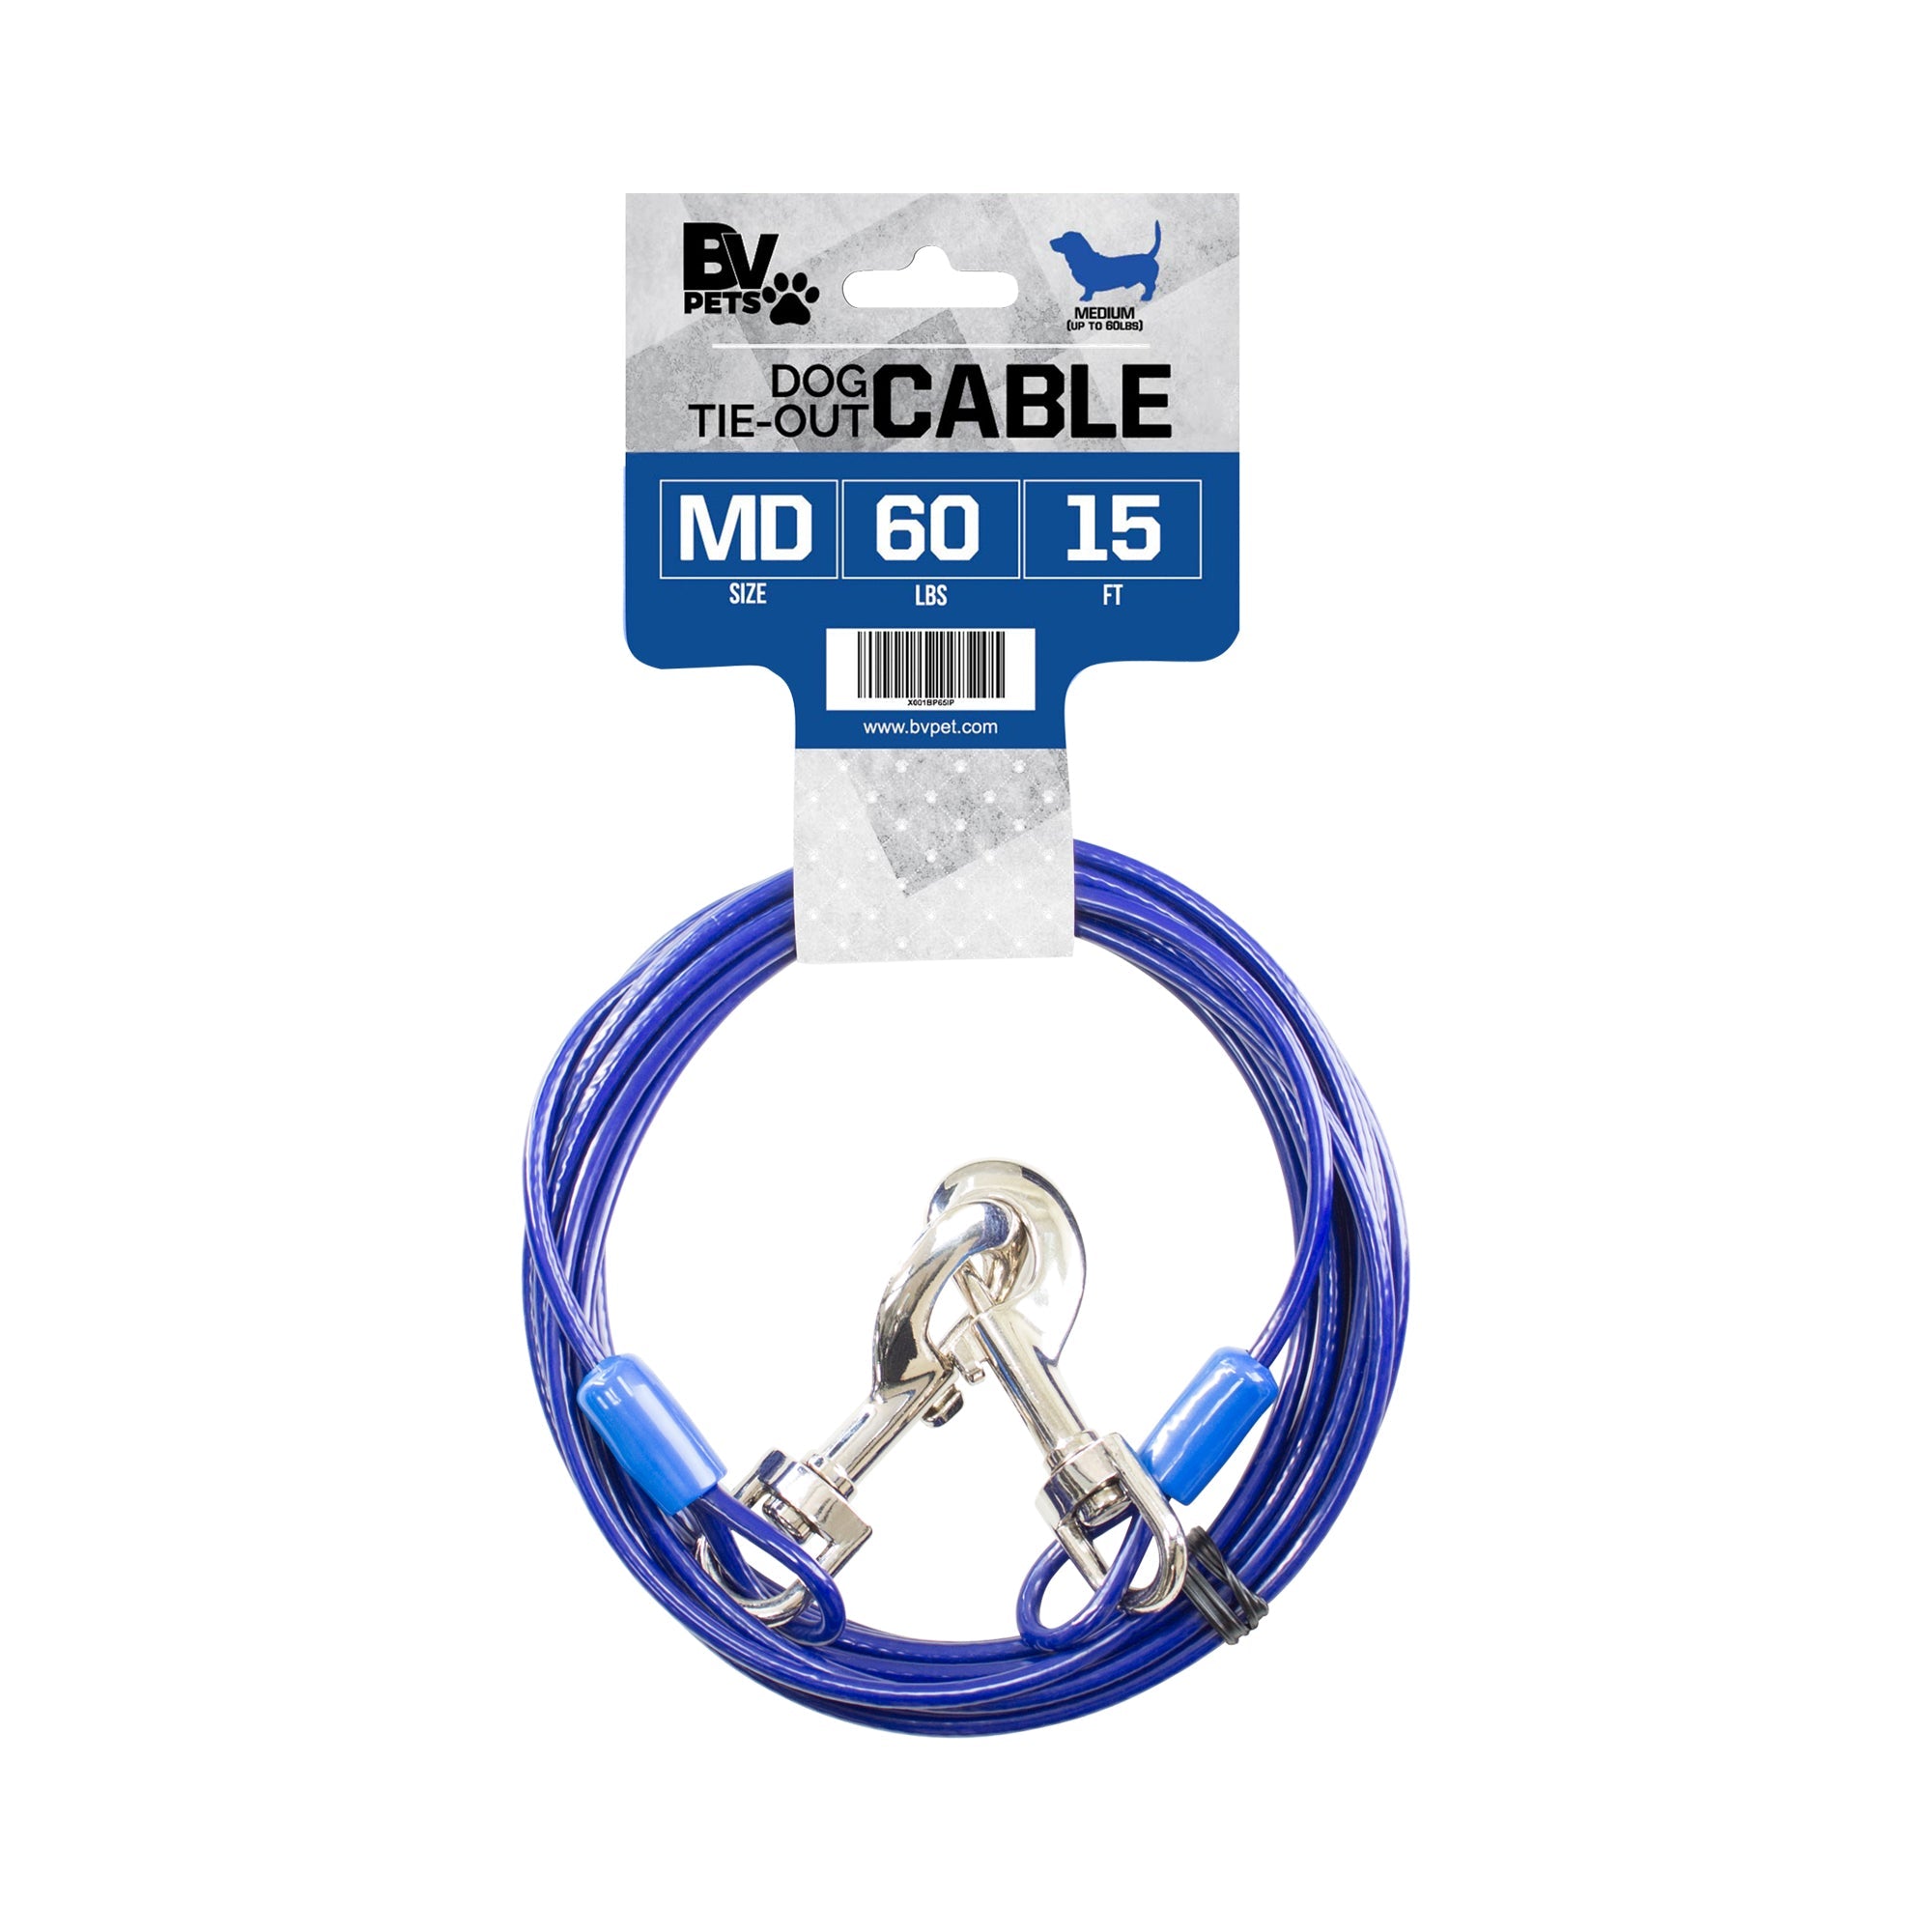 BV Pet Medium Tie Out Cable - for Dog up to 60Lbs - 15ft